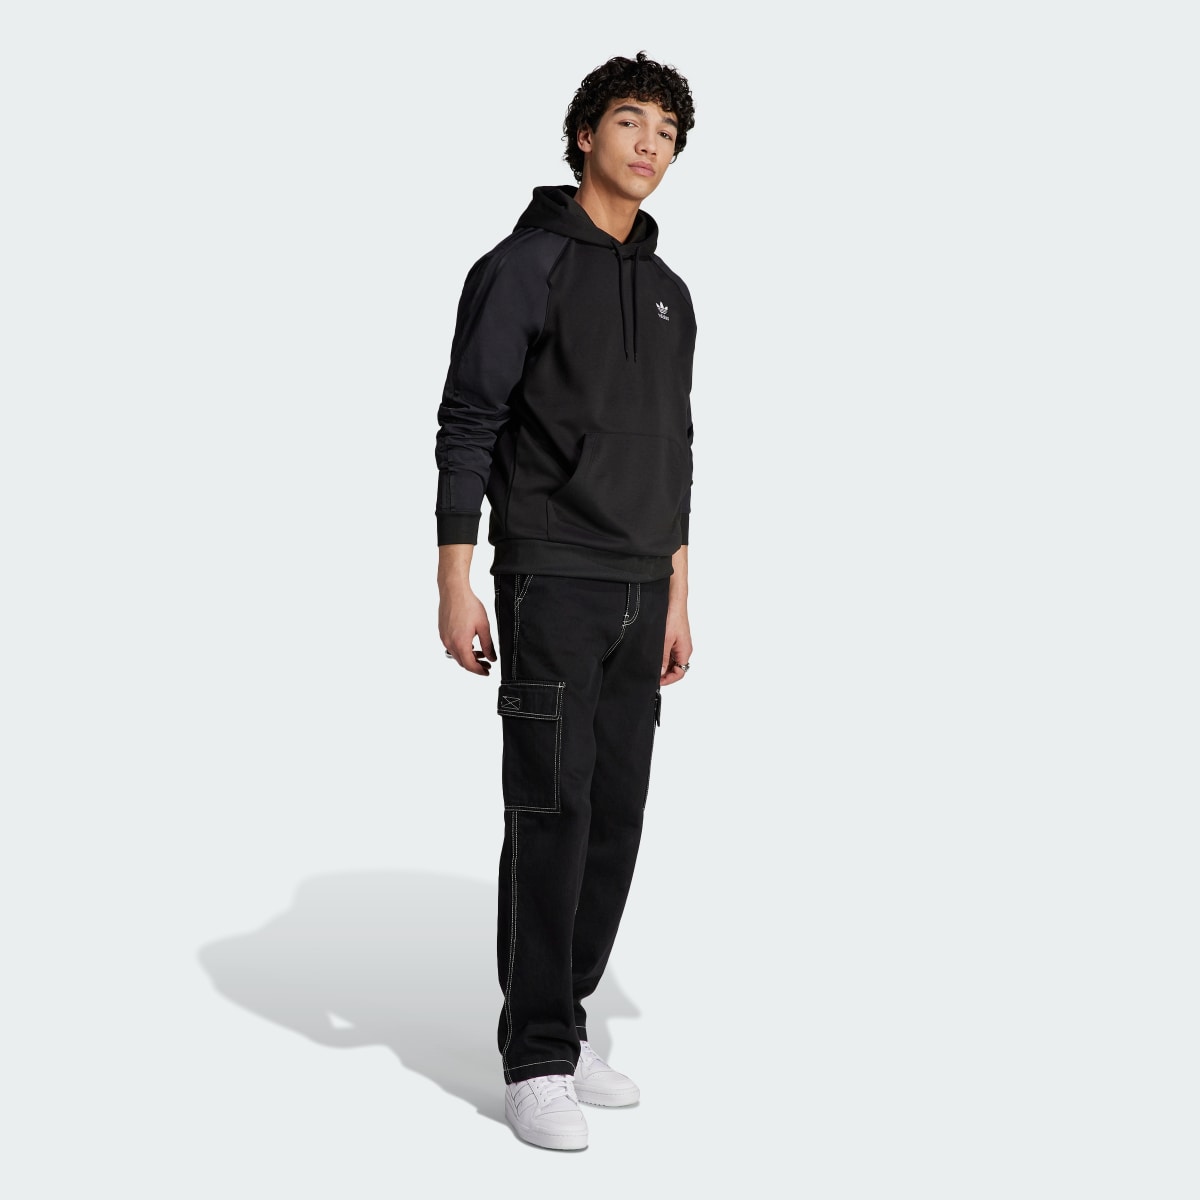 Adidas Adicolor Re-Pro SST Material Mix Hoodie. 5